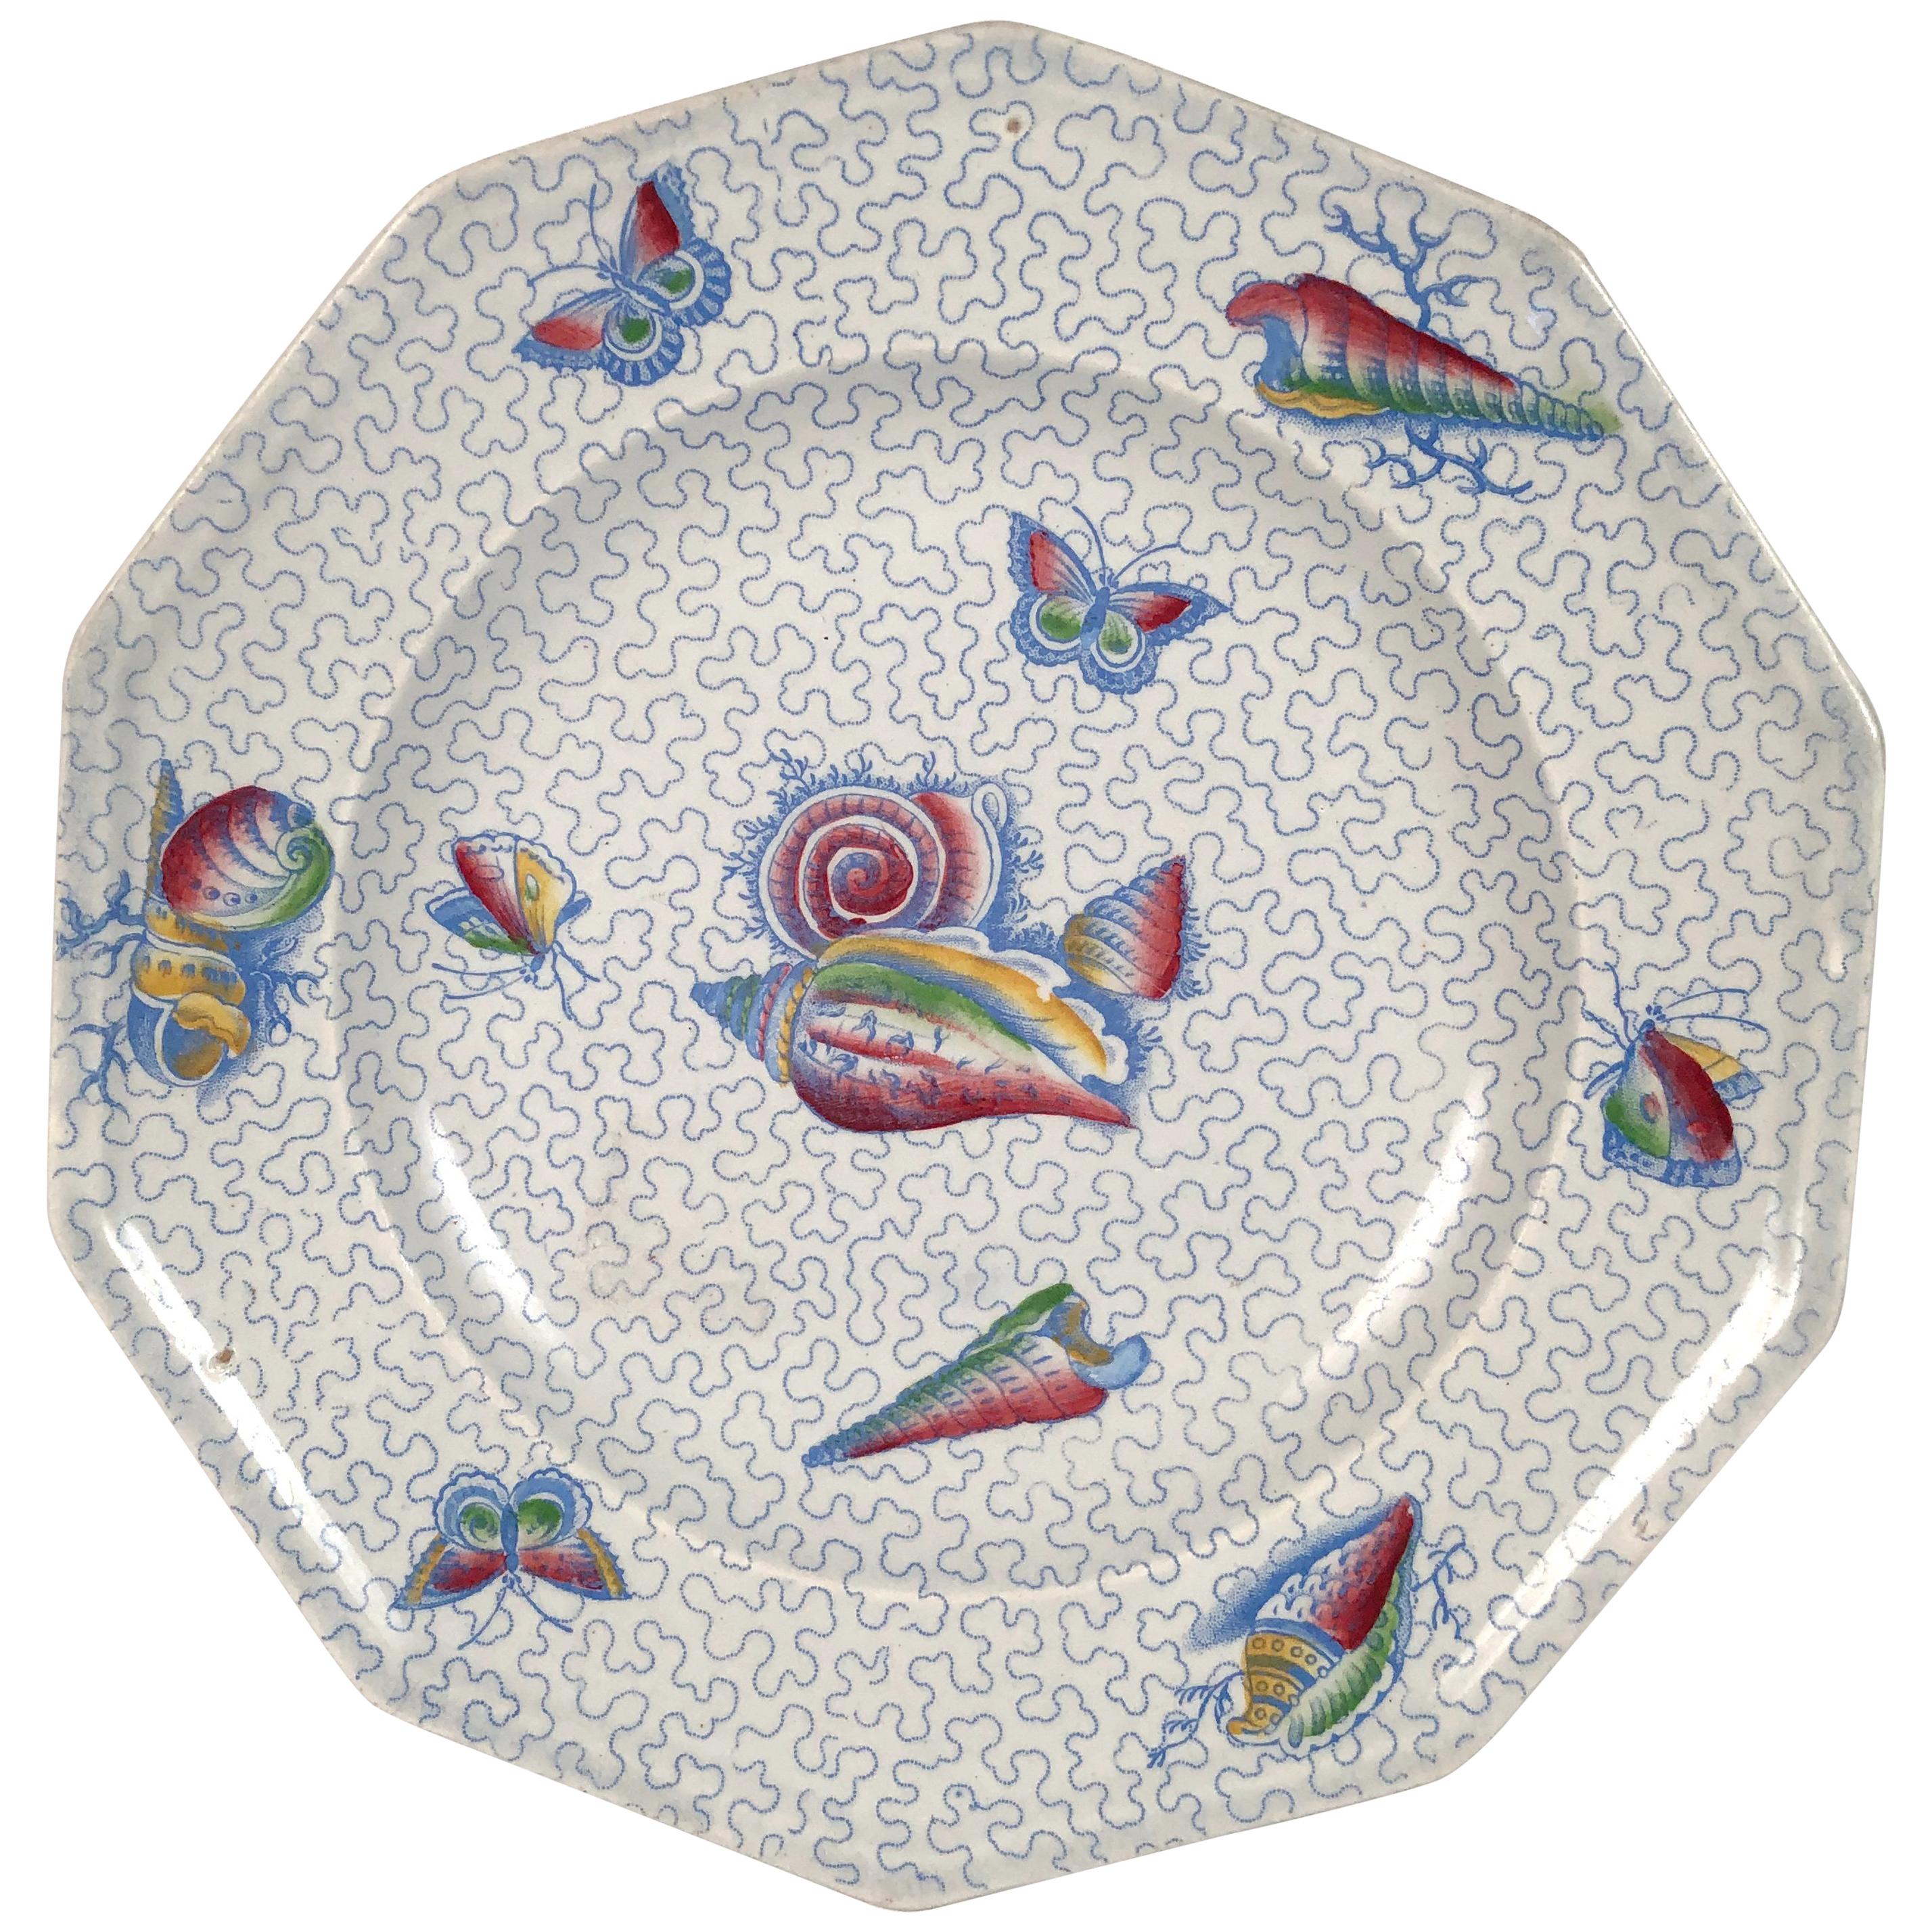 Staffordshire Sea Shell and Butterfly Plate, circa 1820-1830